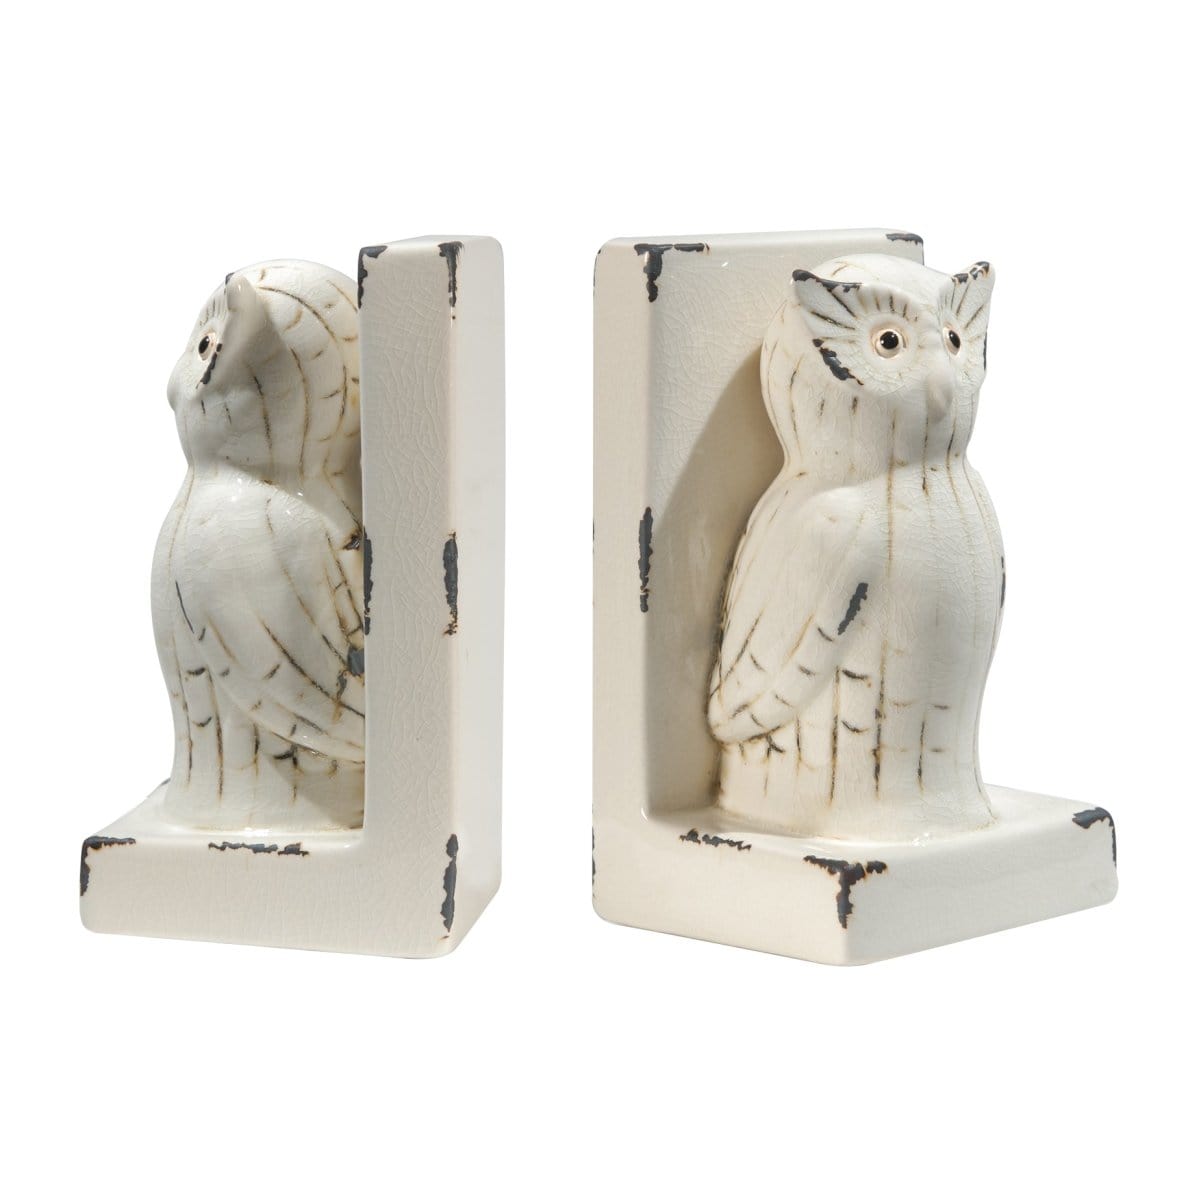 AB-68461 Owl Bookends  S/2 3.8x3.8x6.8&quot; picket and rail